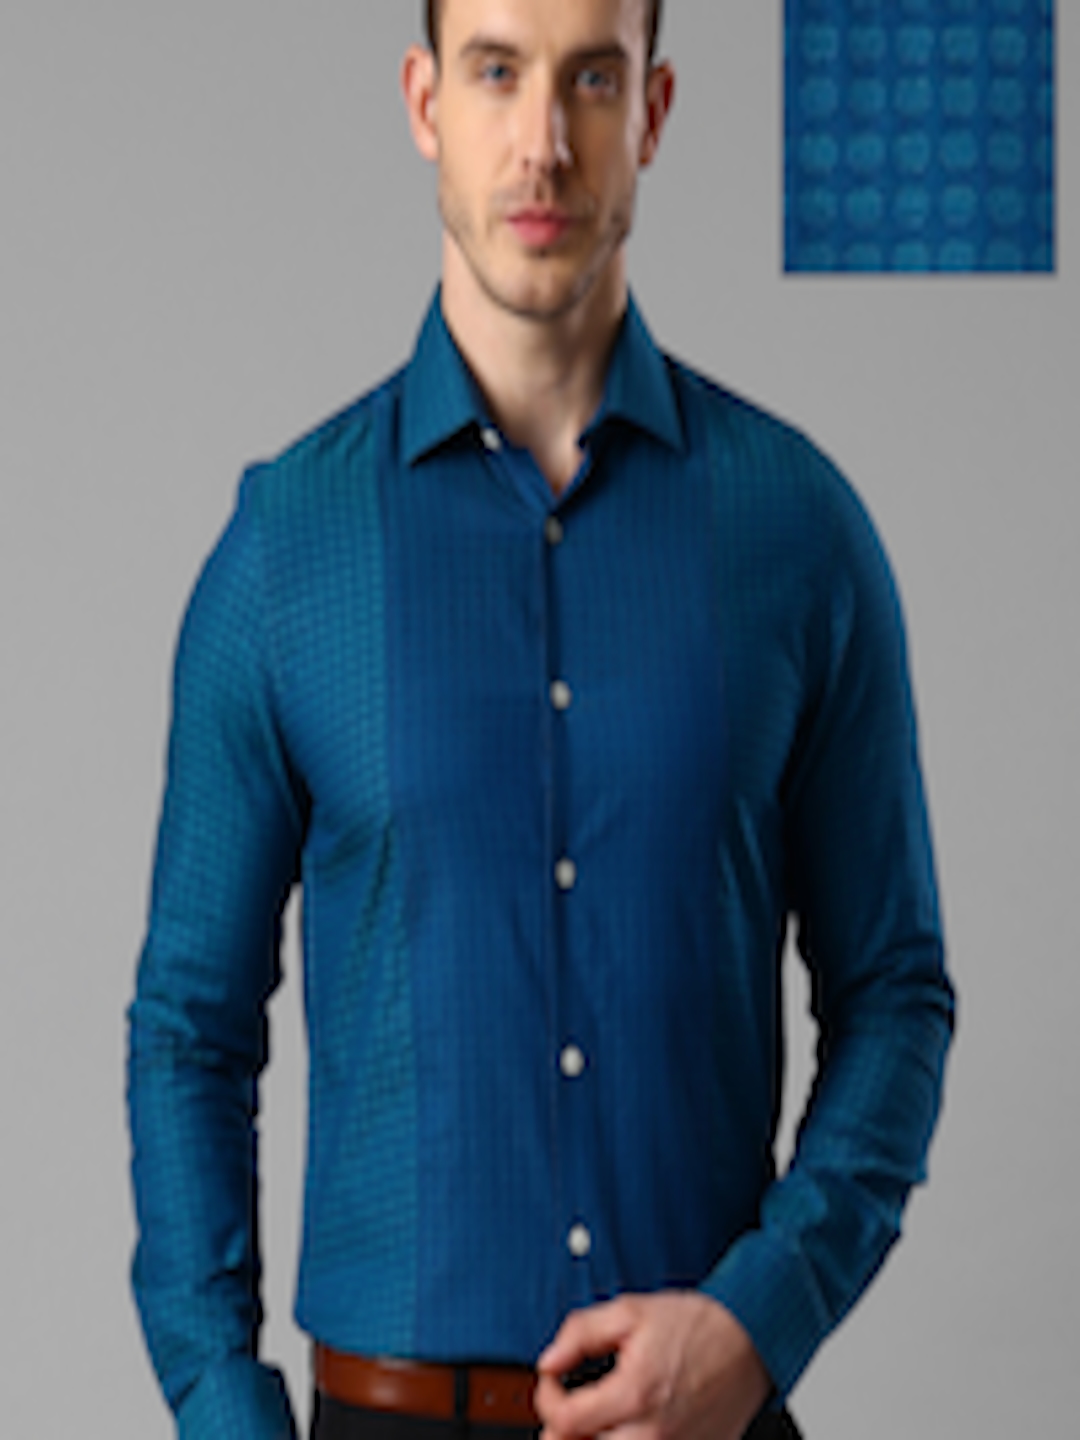 Buy INVICTUS Blue & Green Two Toned Slim Fit Sustainable Formal Shirt ...